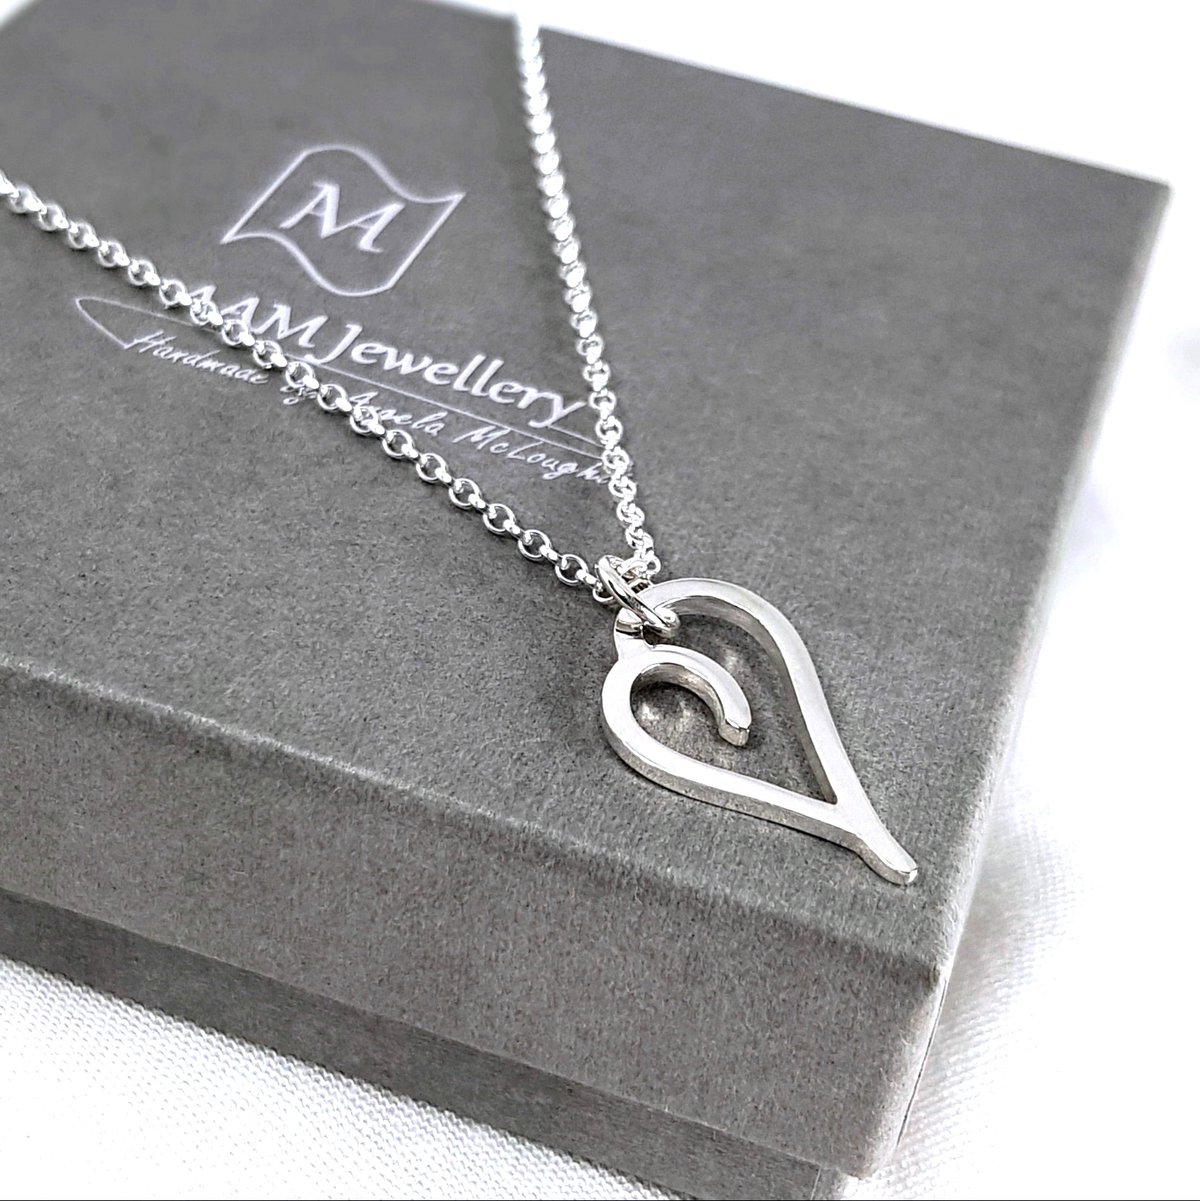 Image of Silver Heart Necklace, Handmade Sterling Silver Heart Pendant, Sustainable Recycled Silver Jewellery